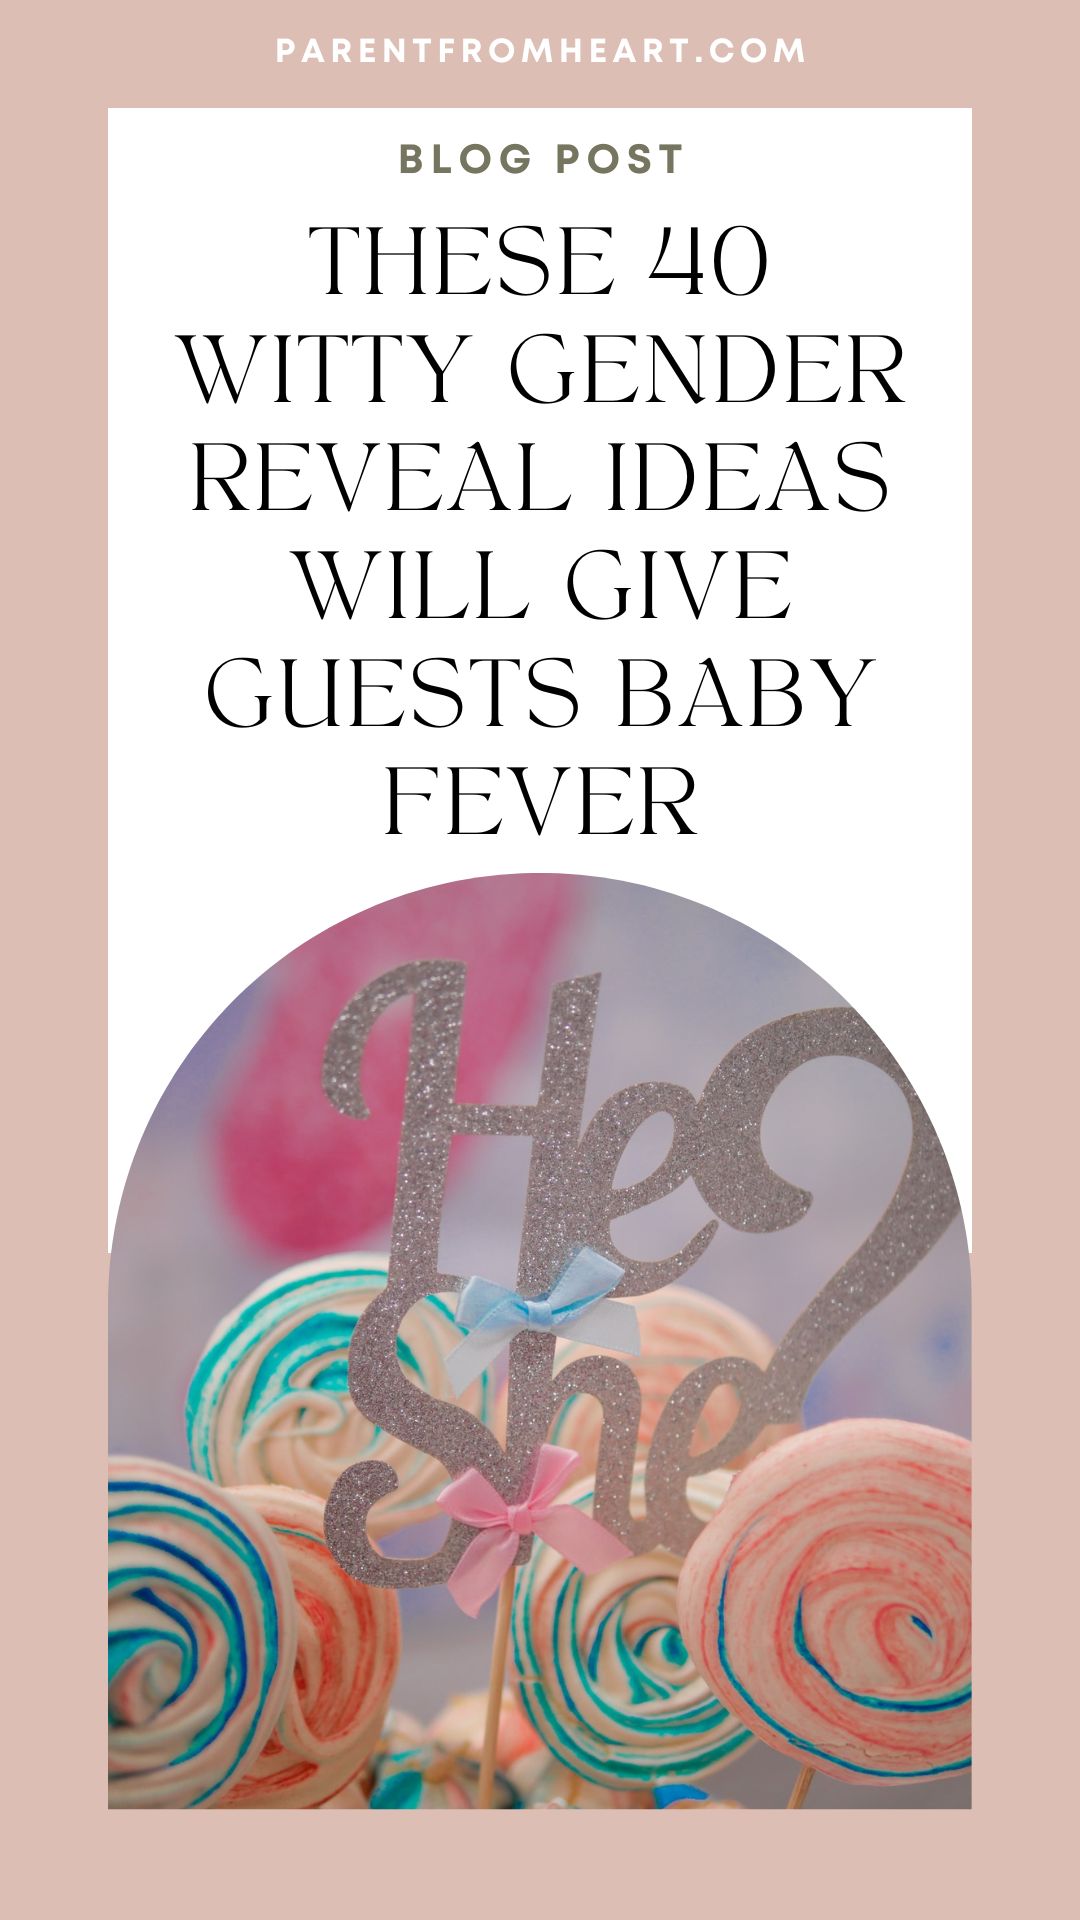 These 40 Witty Gender Reveal Ideas Will Give Guests Baby Fever